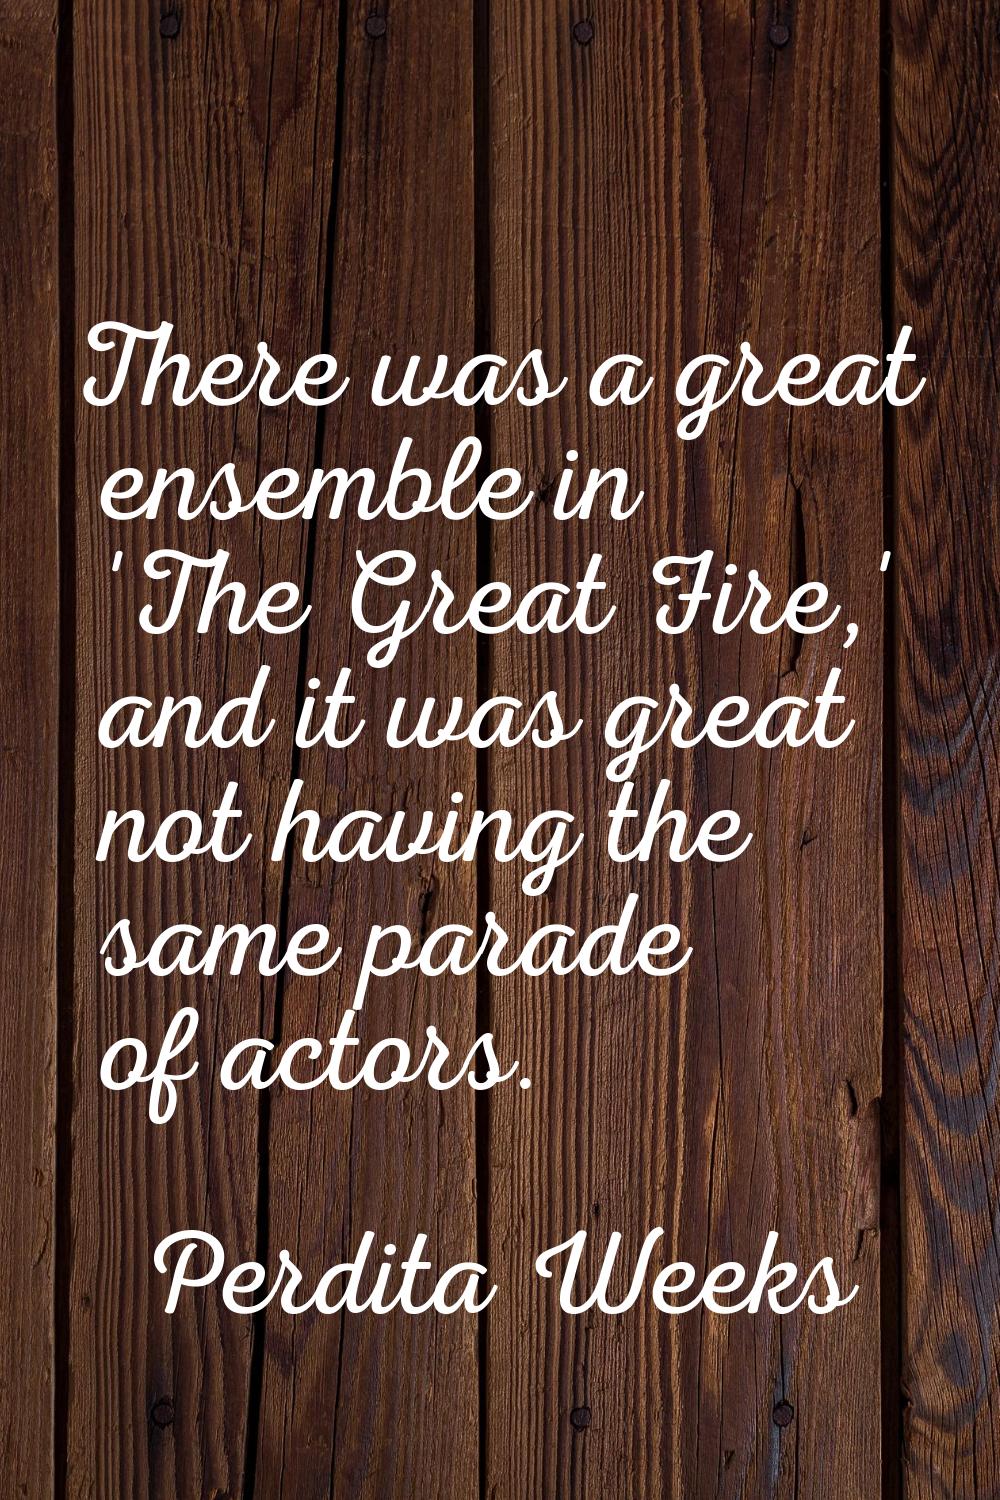 There was a great ensemble in 'The Great Fire,' and it was great not having the same parade of acto